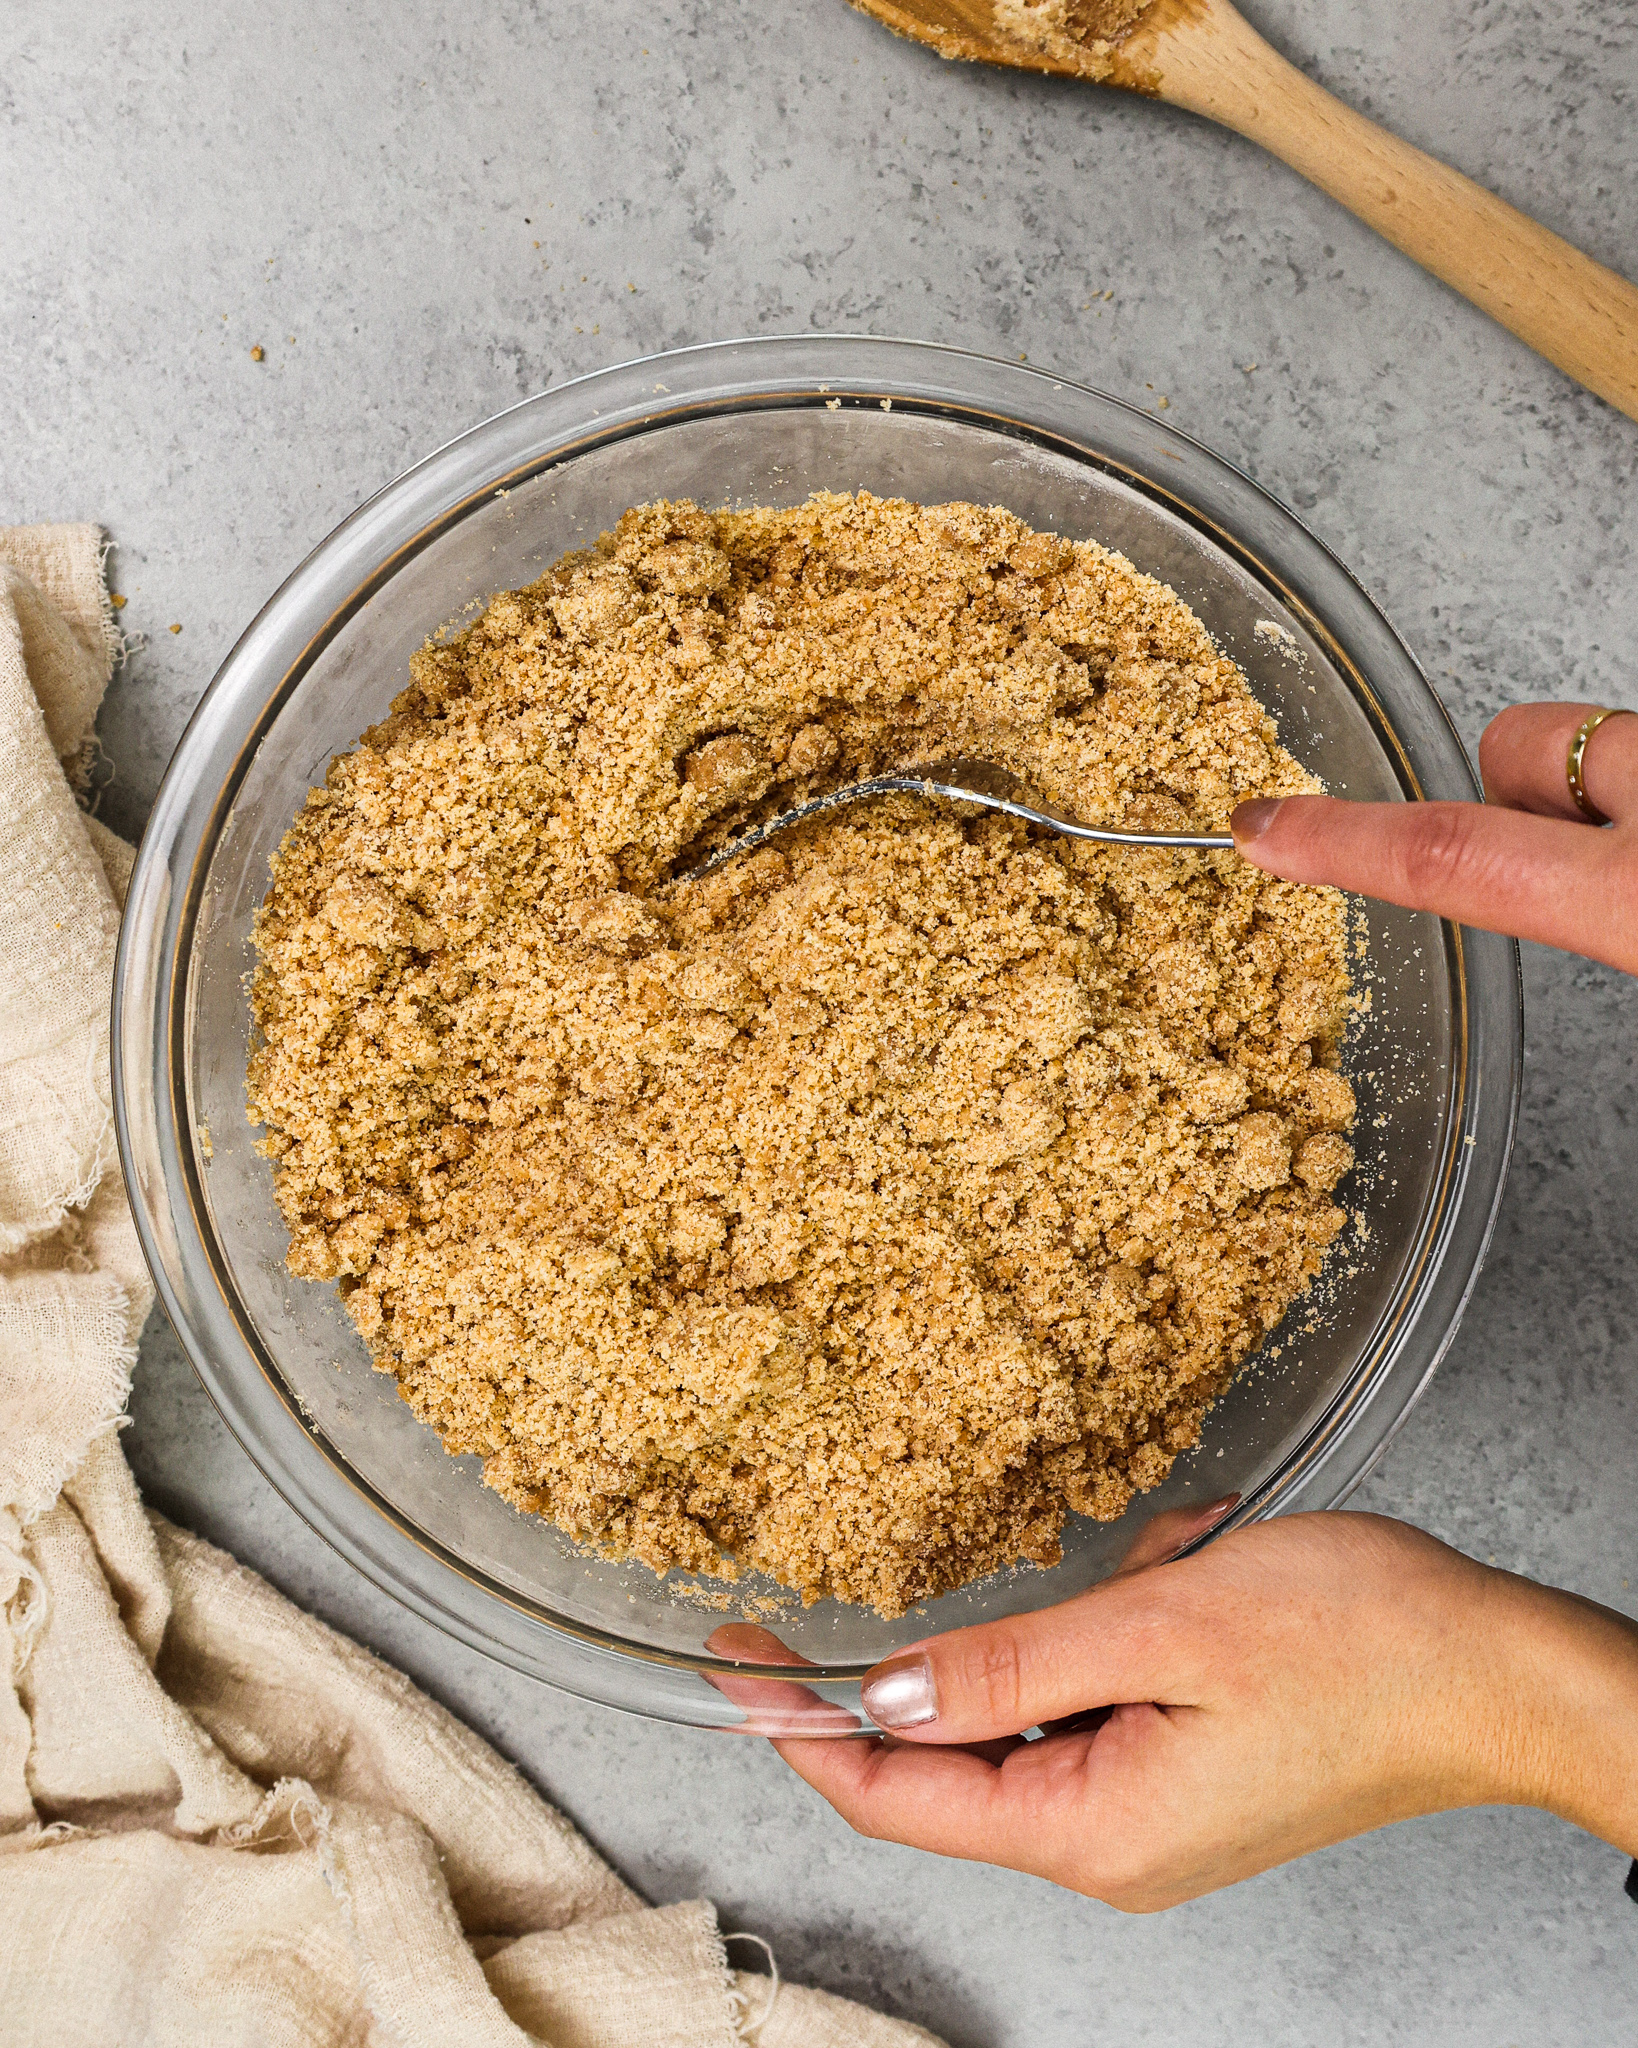 image of cinnamon streusel topping being made with a fork